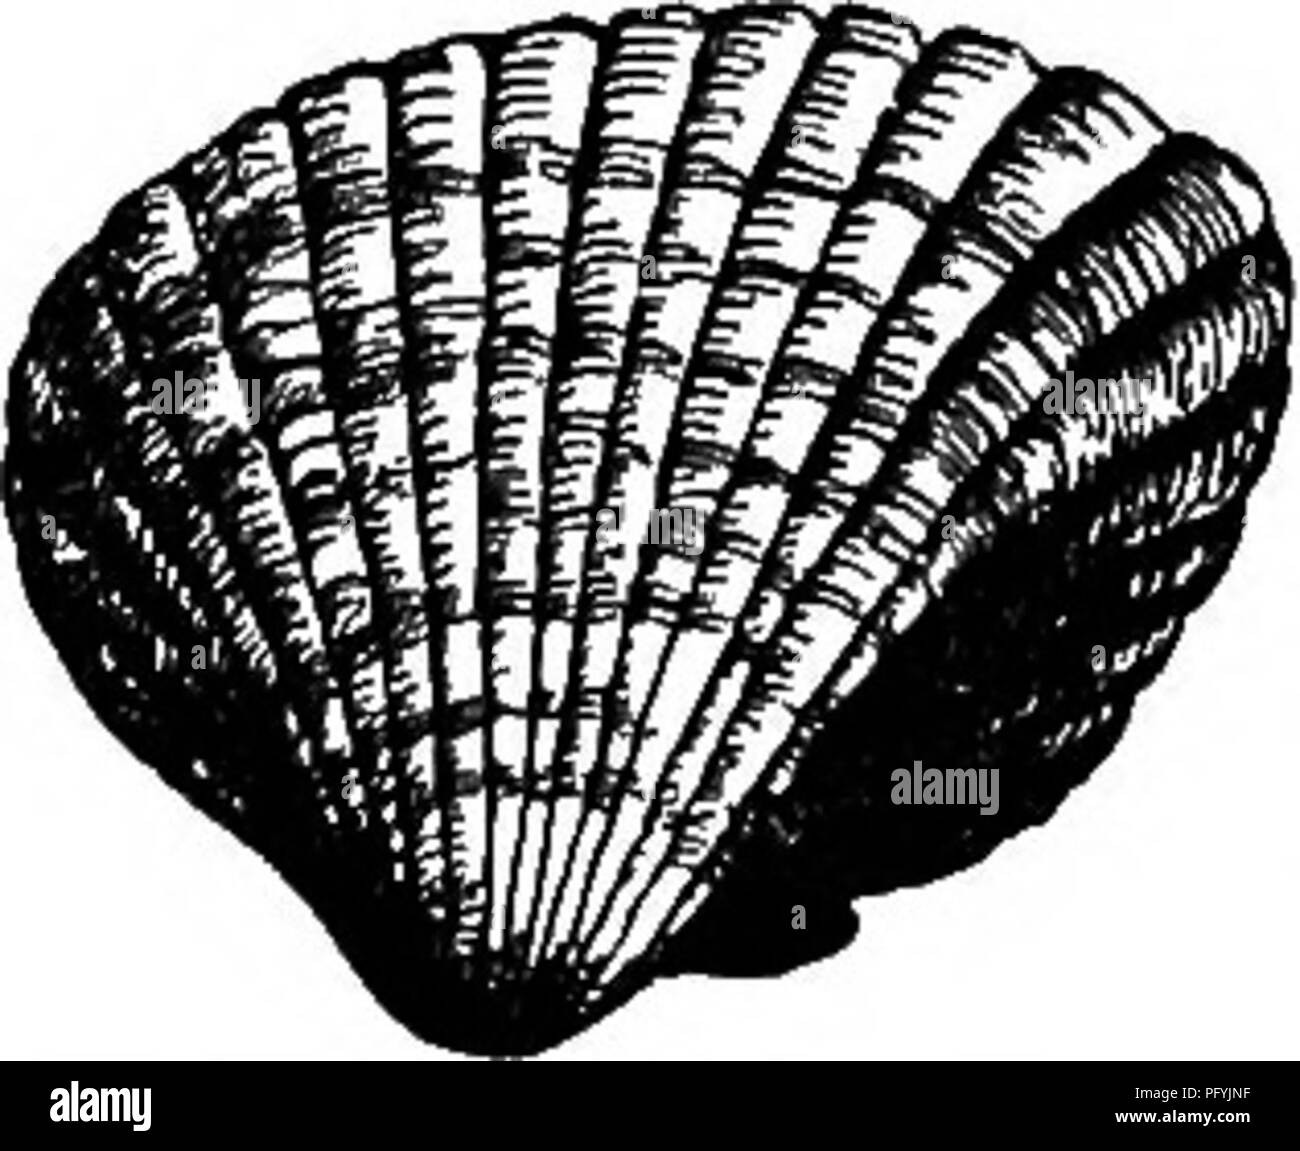 . The popular natural history . Zoology. 520 RAZOR-SHELLS. vast plantations, as they may be called, of these creatures have increased to such an extent, that they threaten to obliterate several useful bays for all maritime purposes. The family of the COCKLES, or Cardiadse, so called from their heart-like shipe, is well represented by the common Cockle {Cardium edule) of our British shores. Generally, the Cocicle is a marine animal ; but it sometimes prefers brackish water to the salt waves of the ocean. This mollusc frequents sandy bays, and remains about low-water mark, burying itself in the  Stock Photo